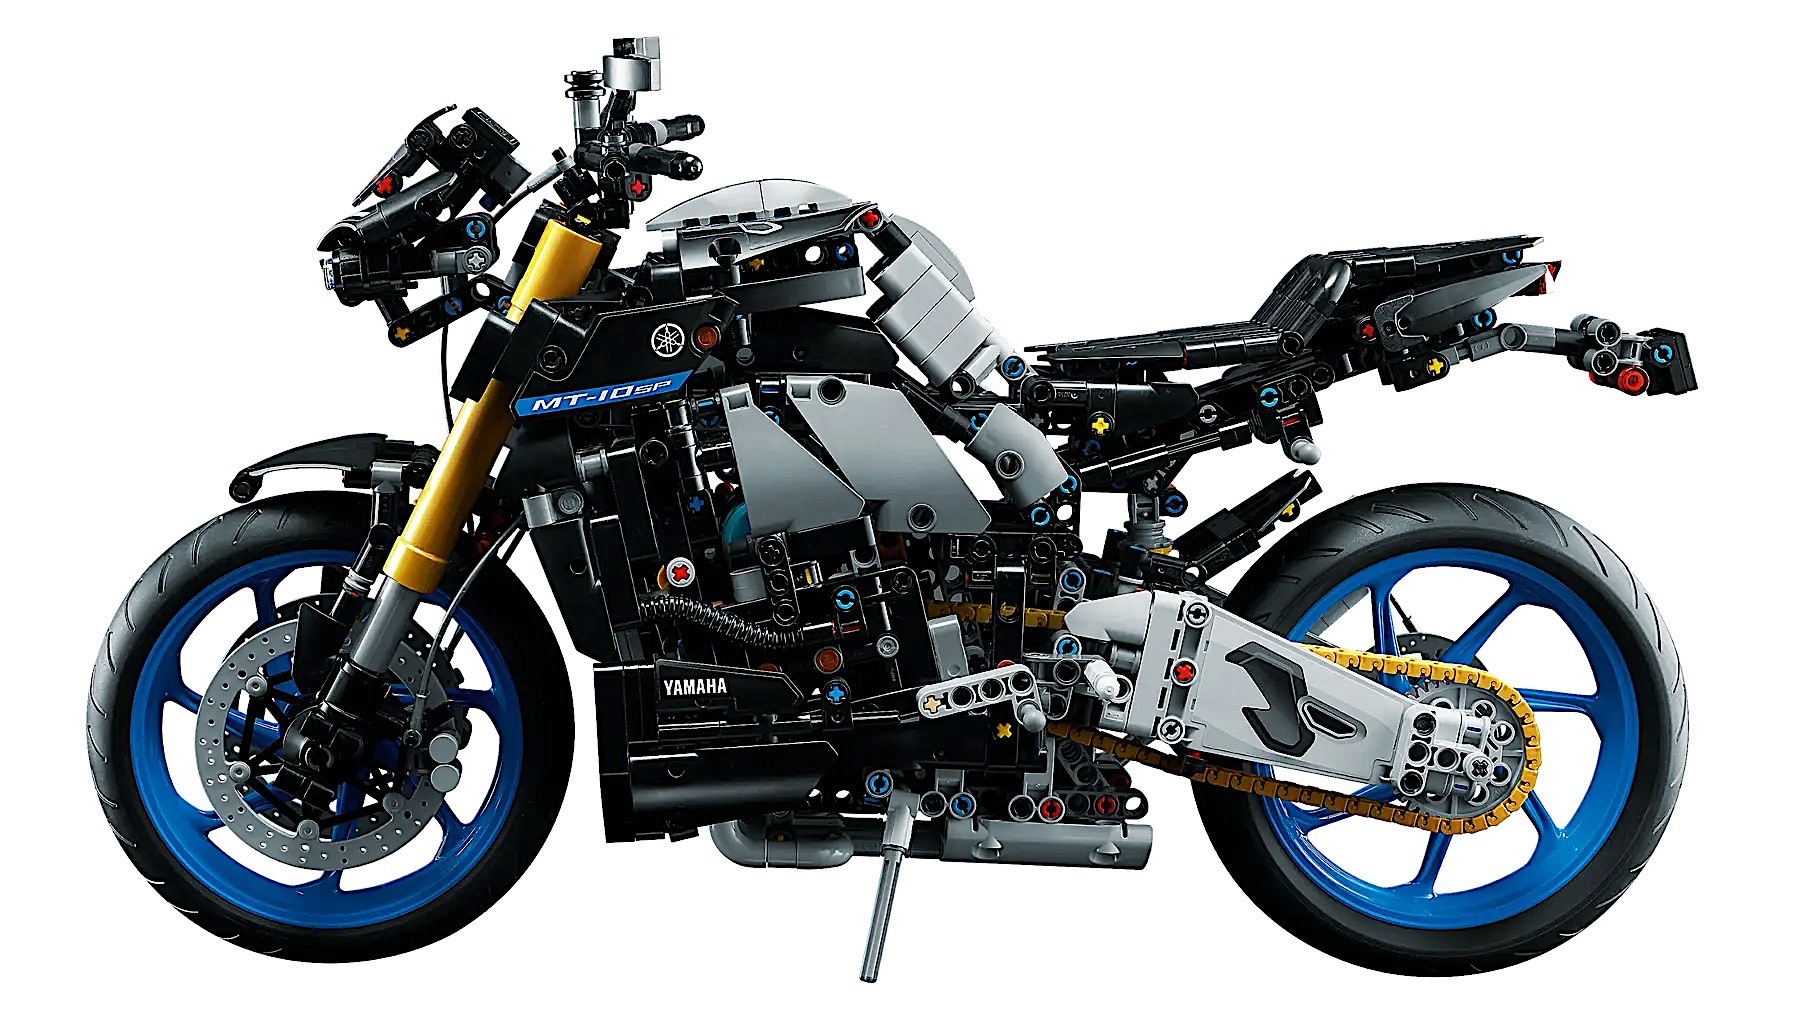 yamaha mt 10 sp comes together from 1478 lego pieces just as aggressive as the real deal 1